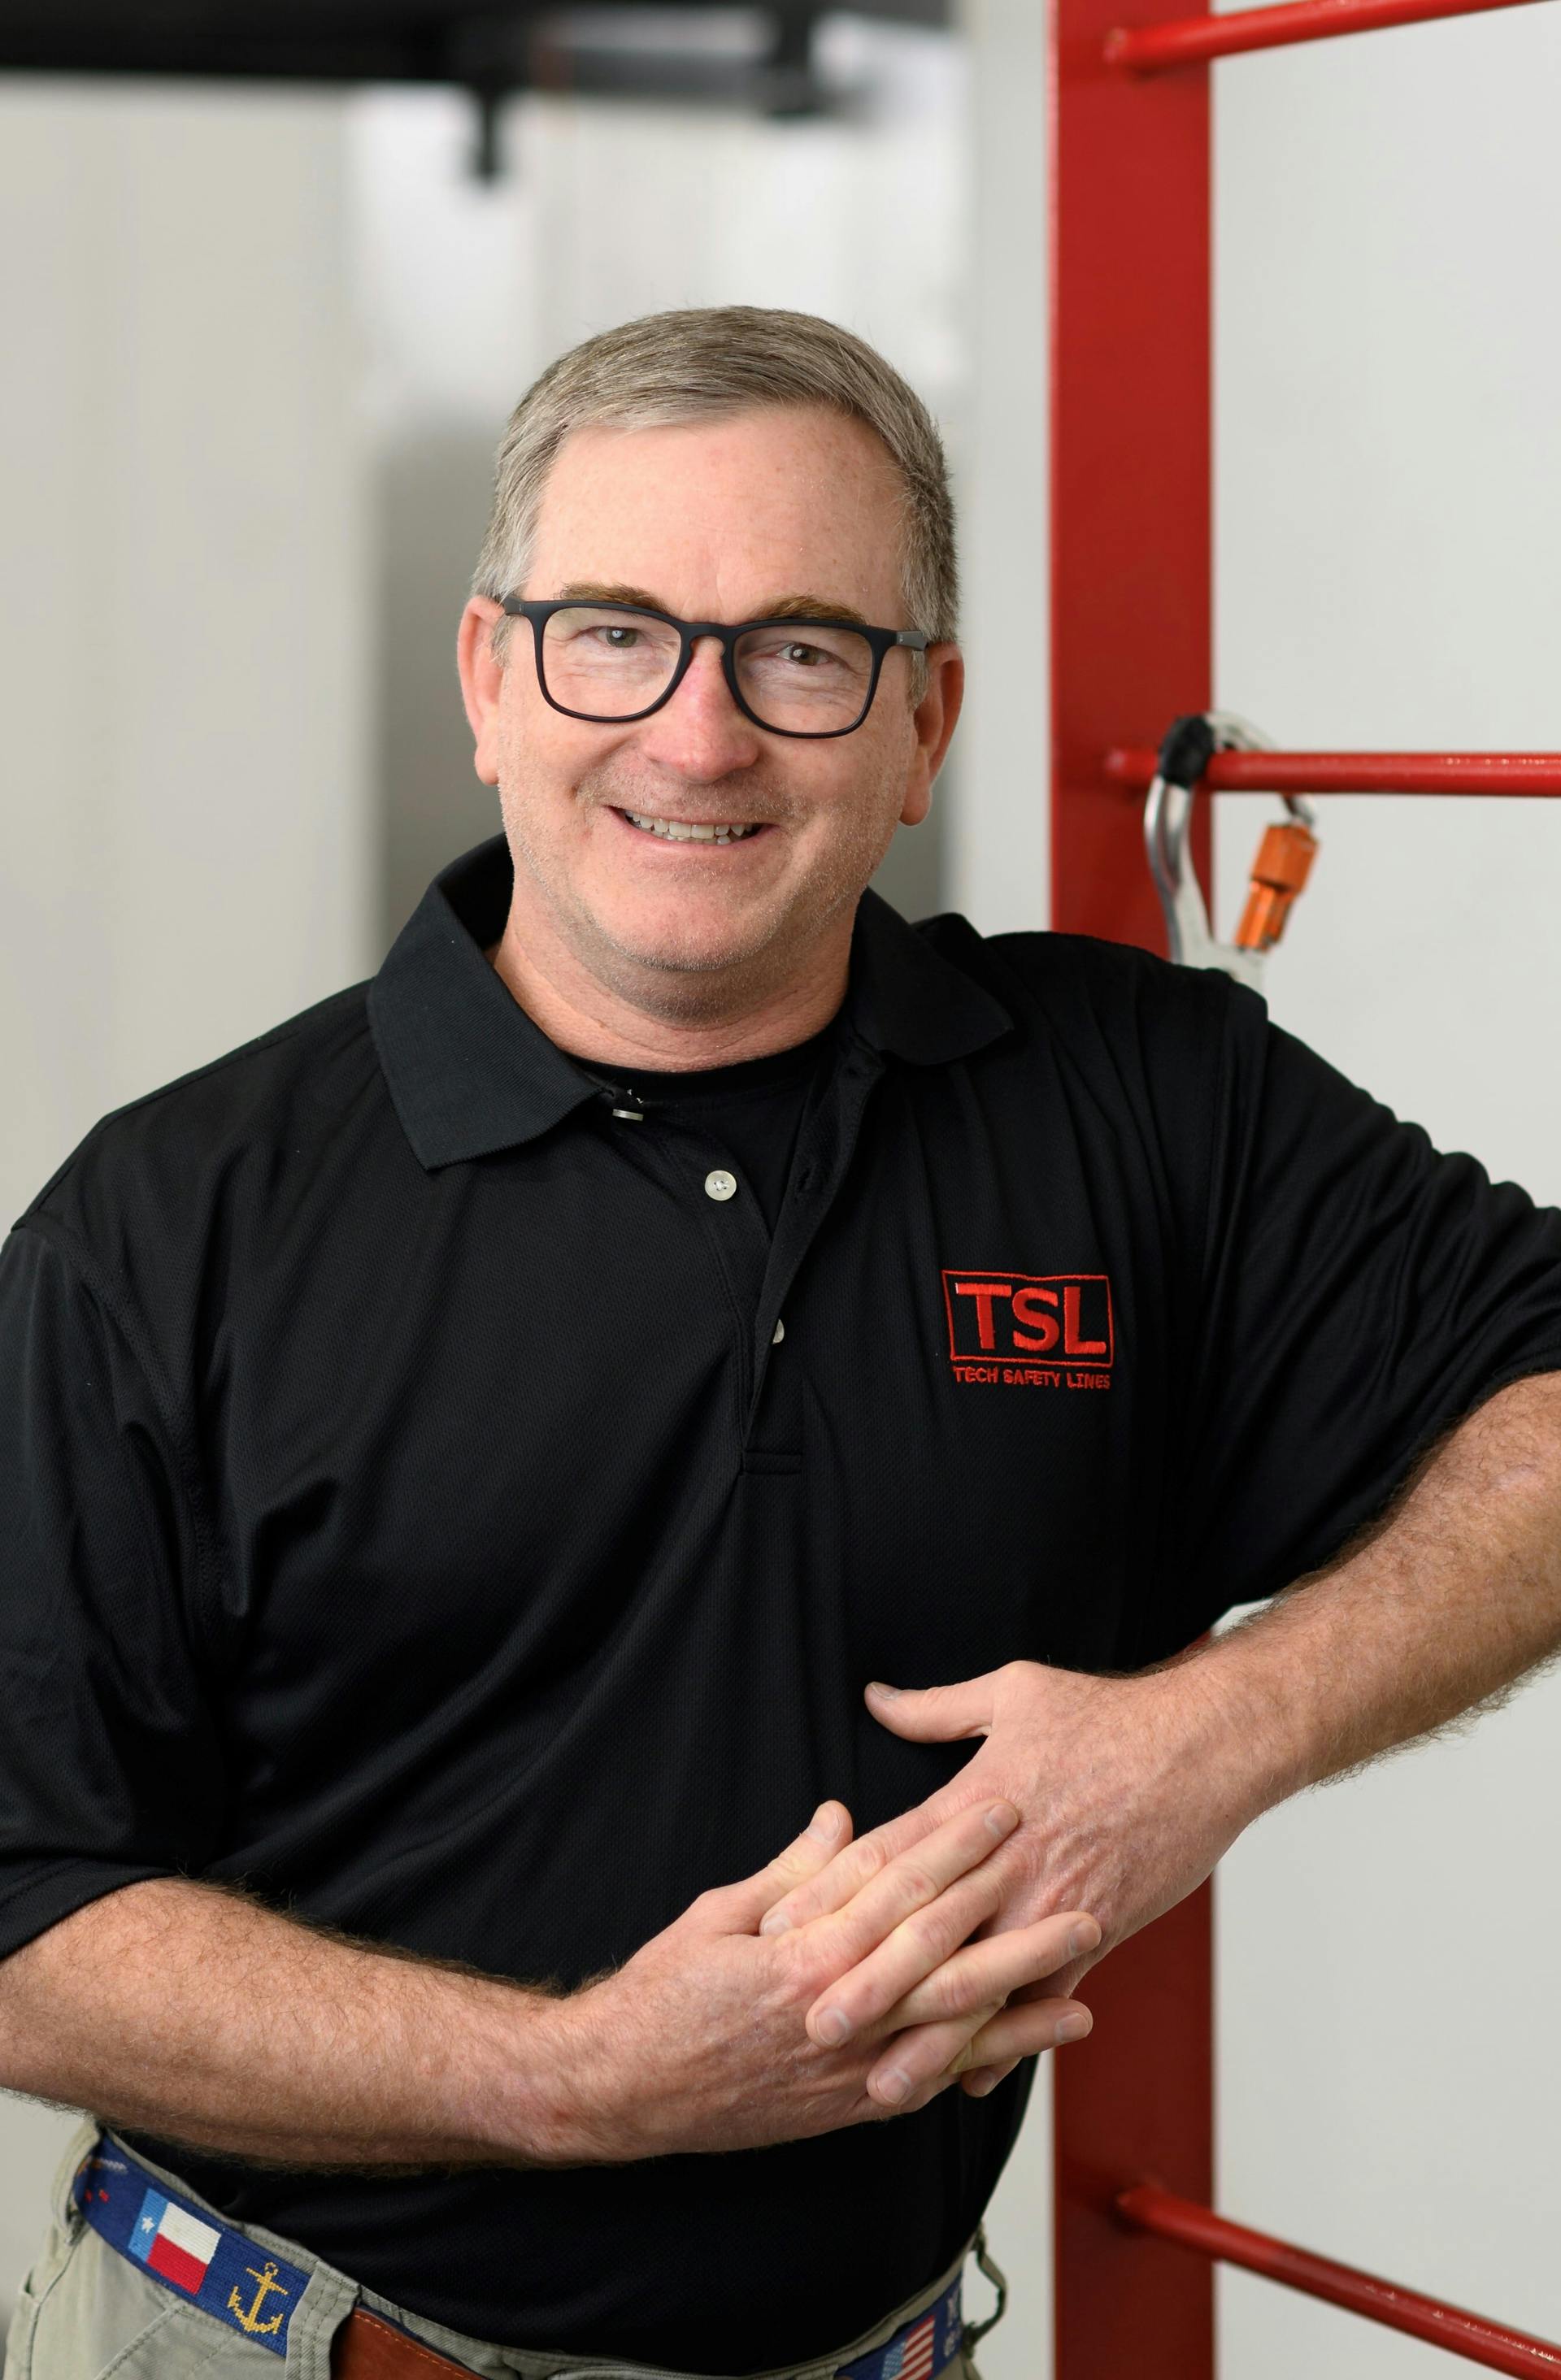 Mark B., Tech Safety Lines Trainer